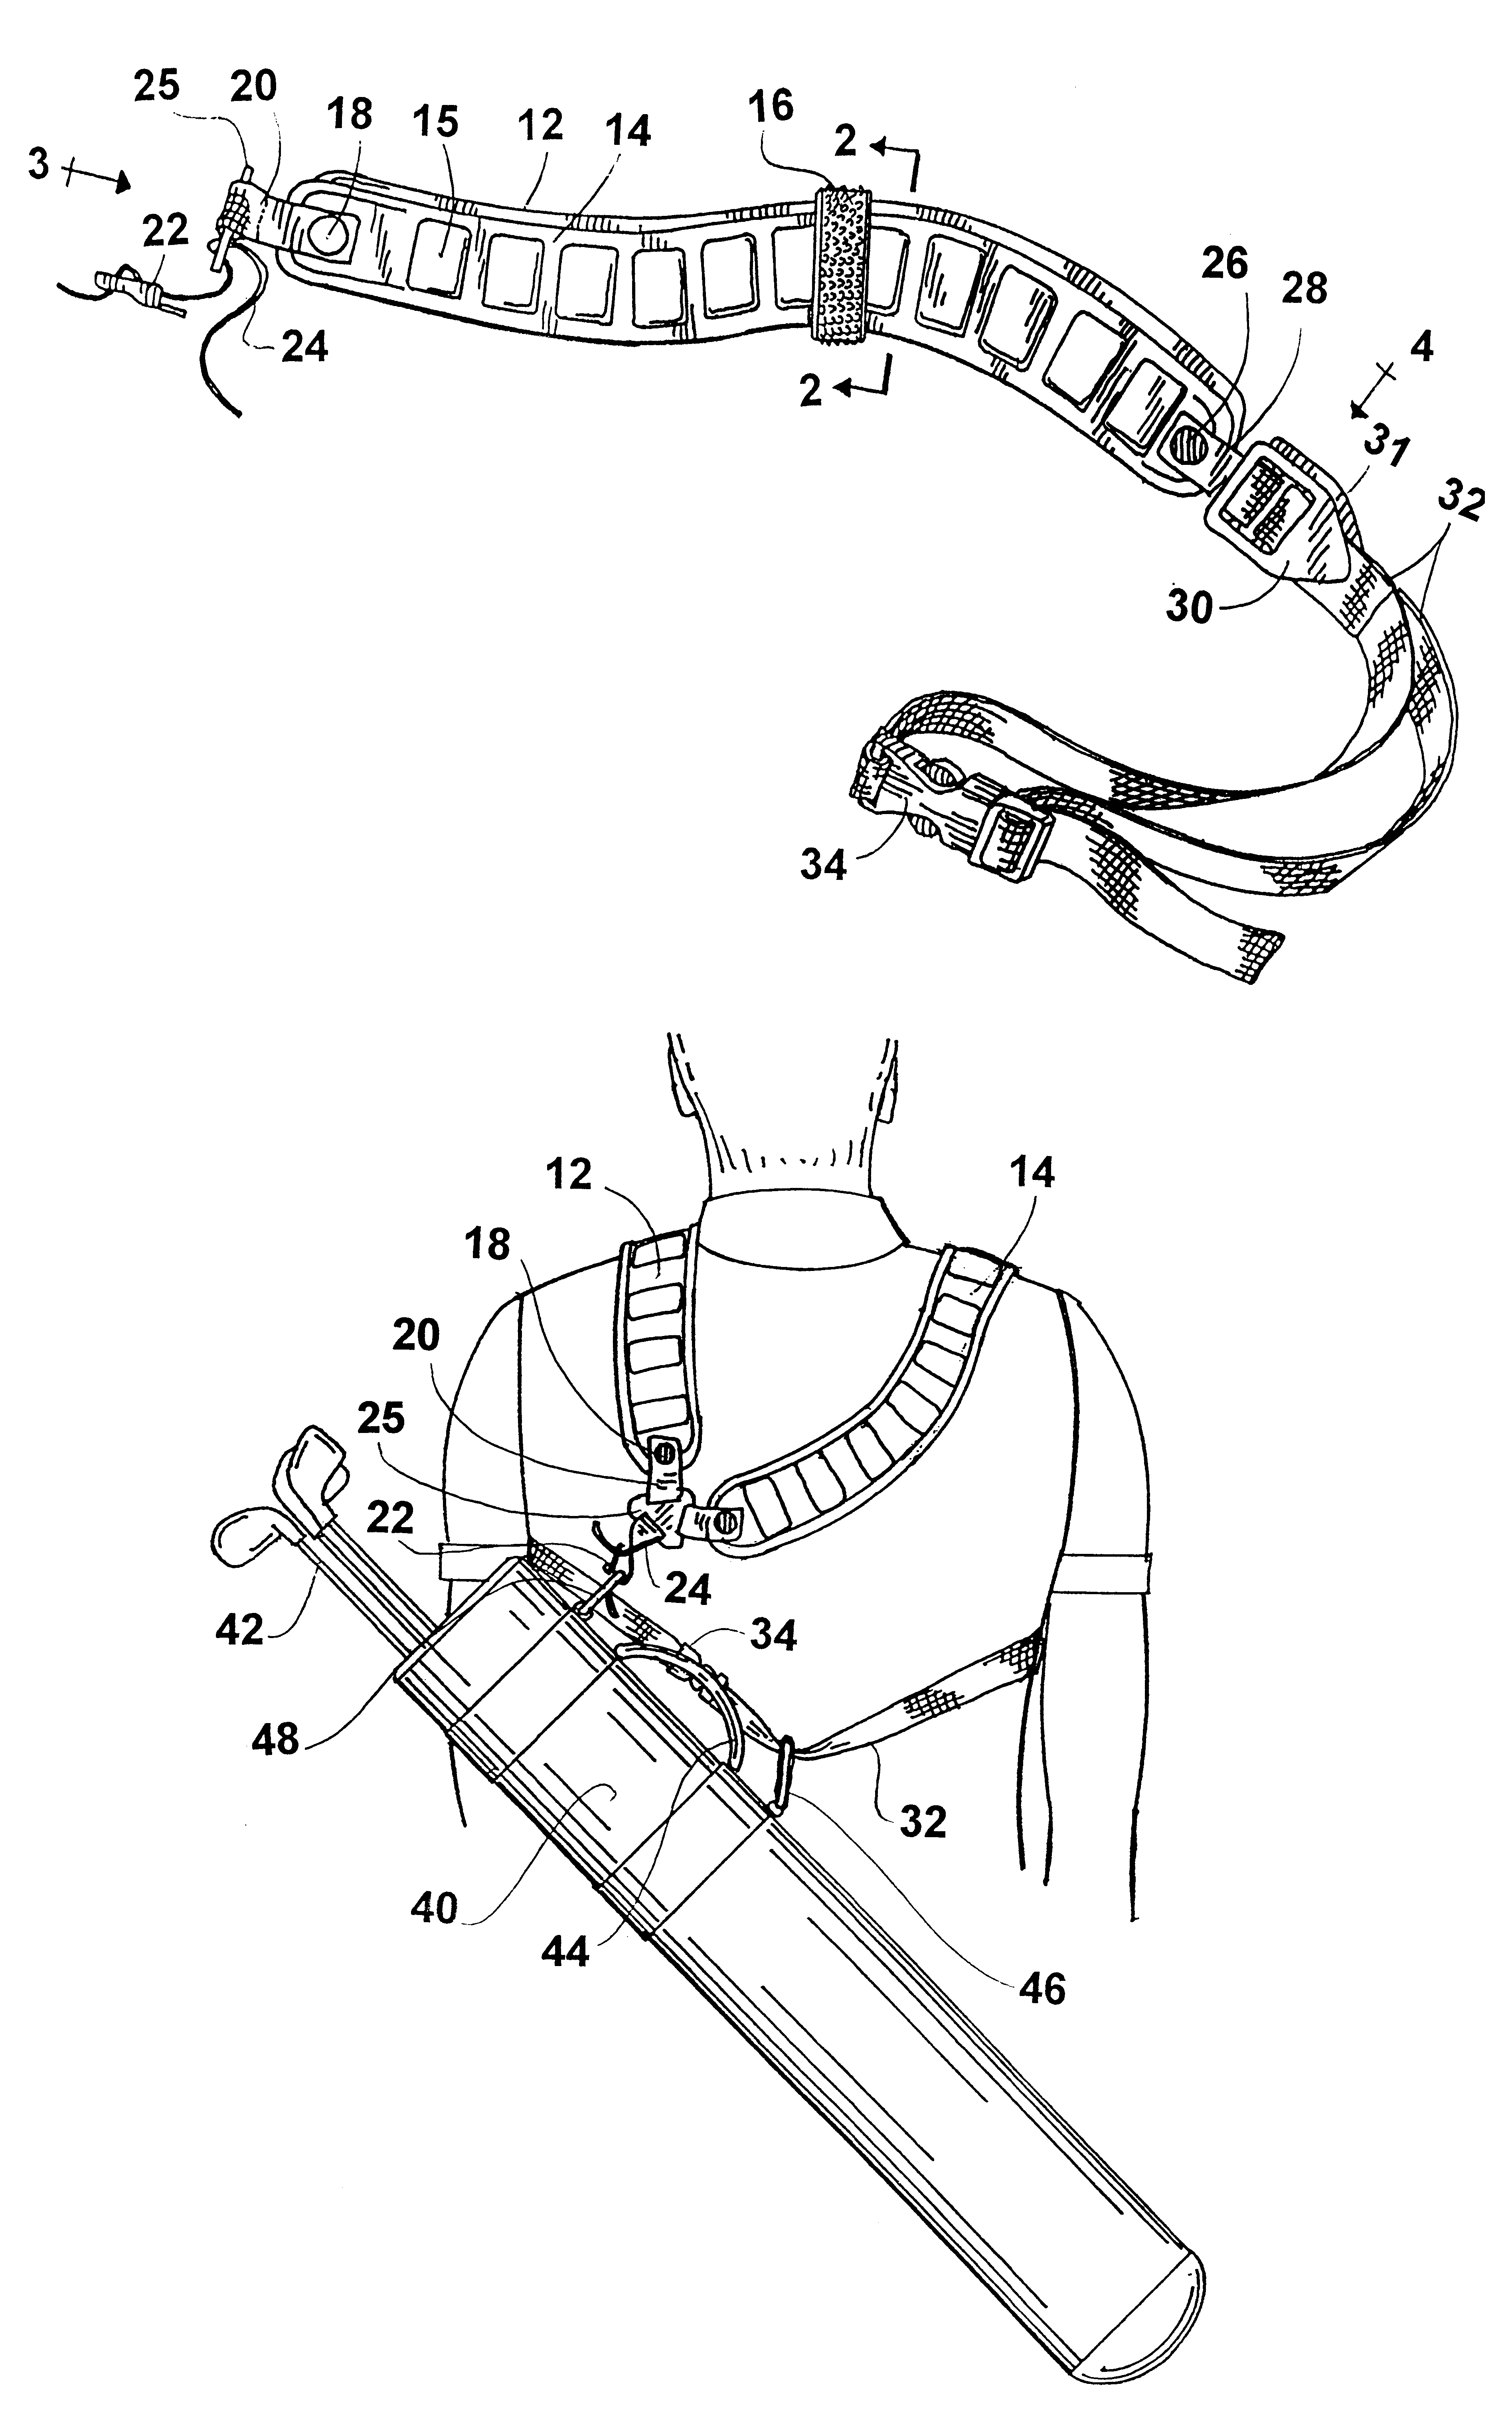 Nested, two-layer golf bag strap for one-shoulder or two-shoulder carrying